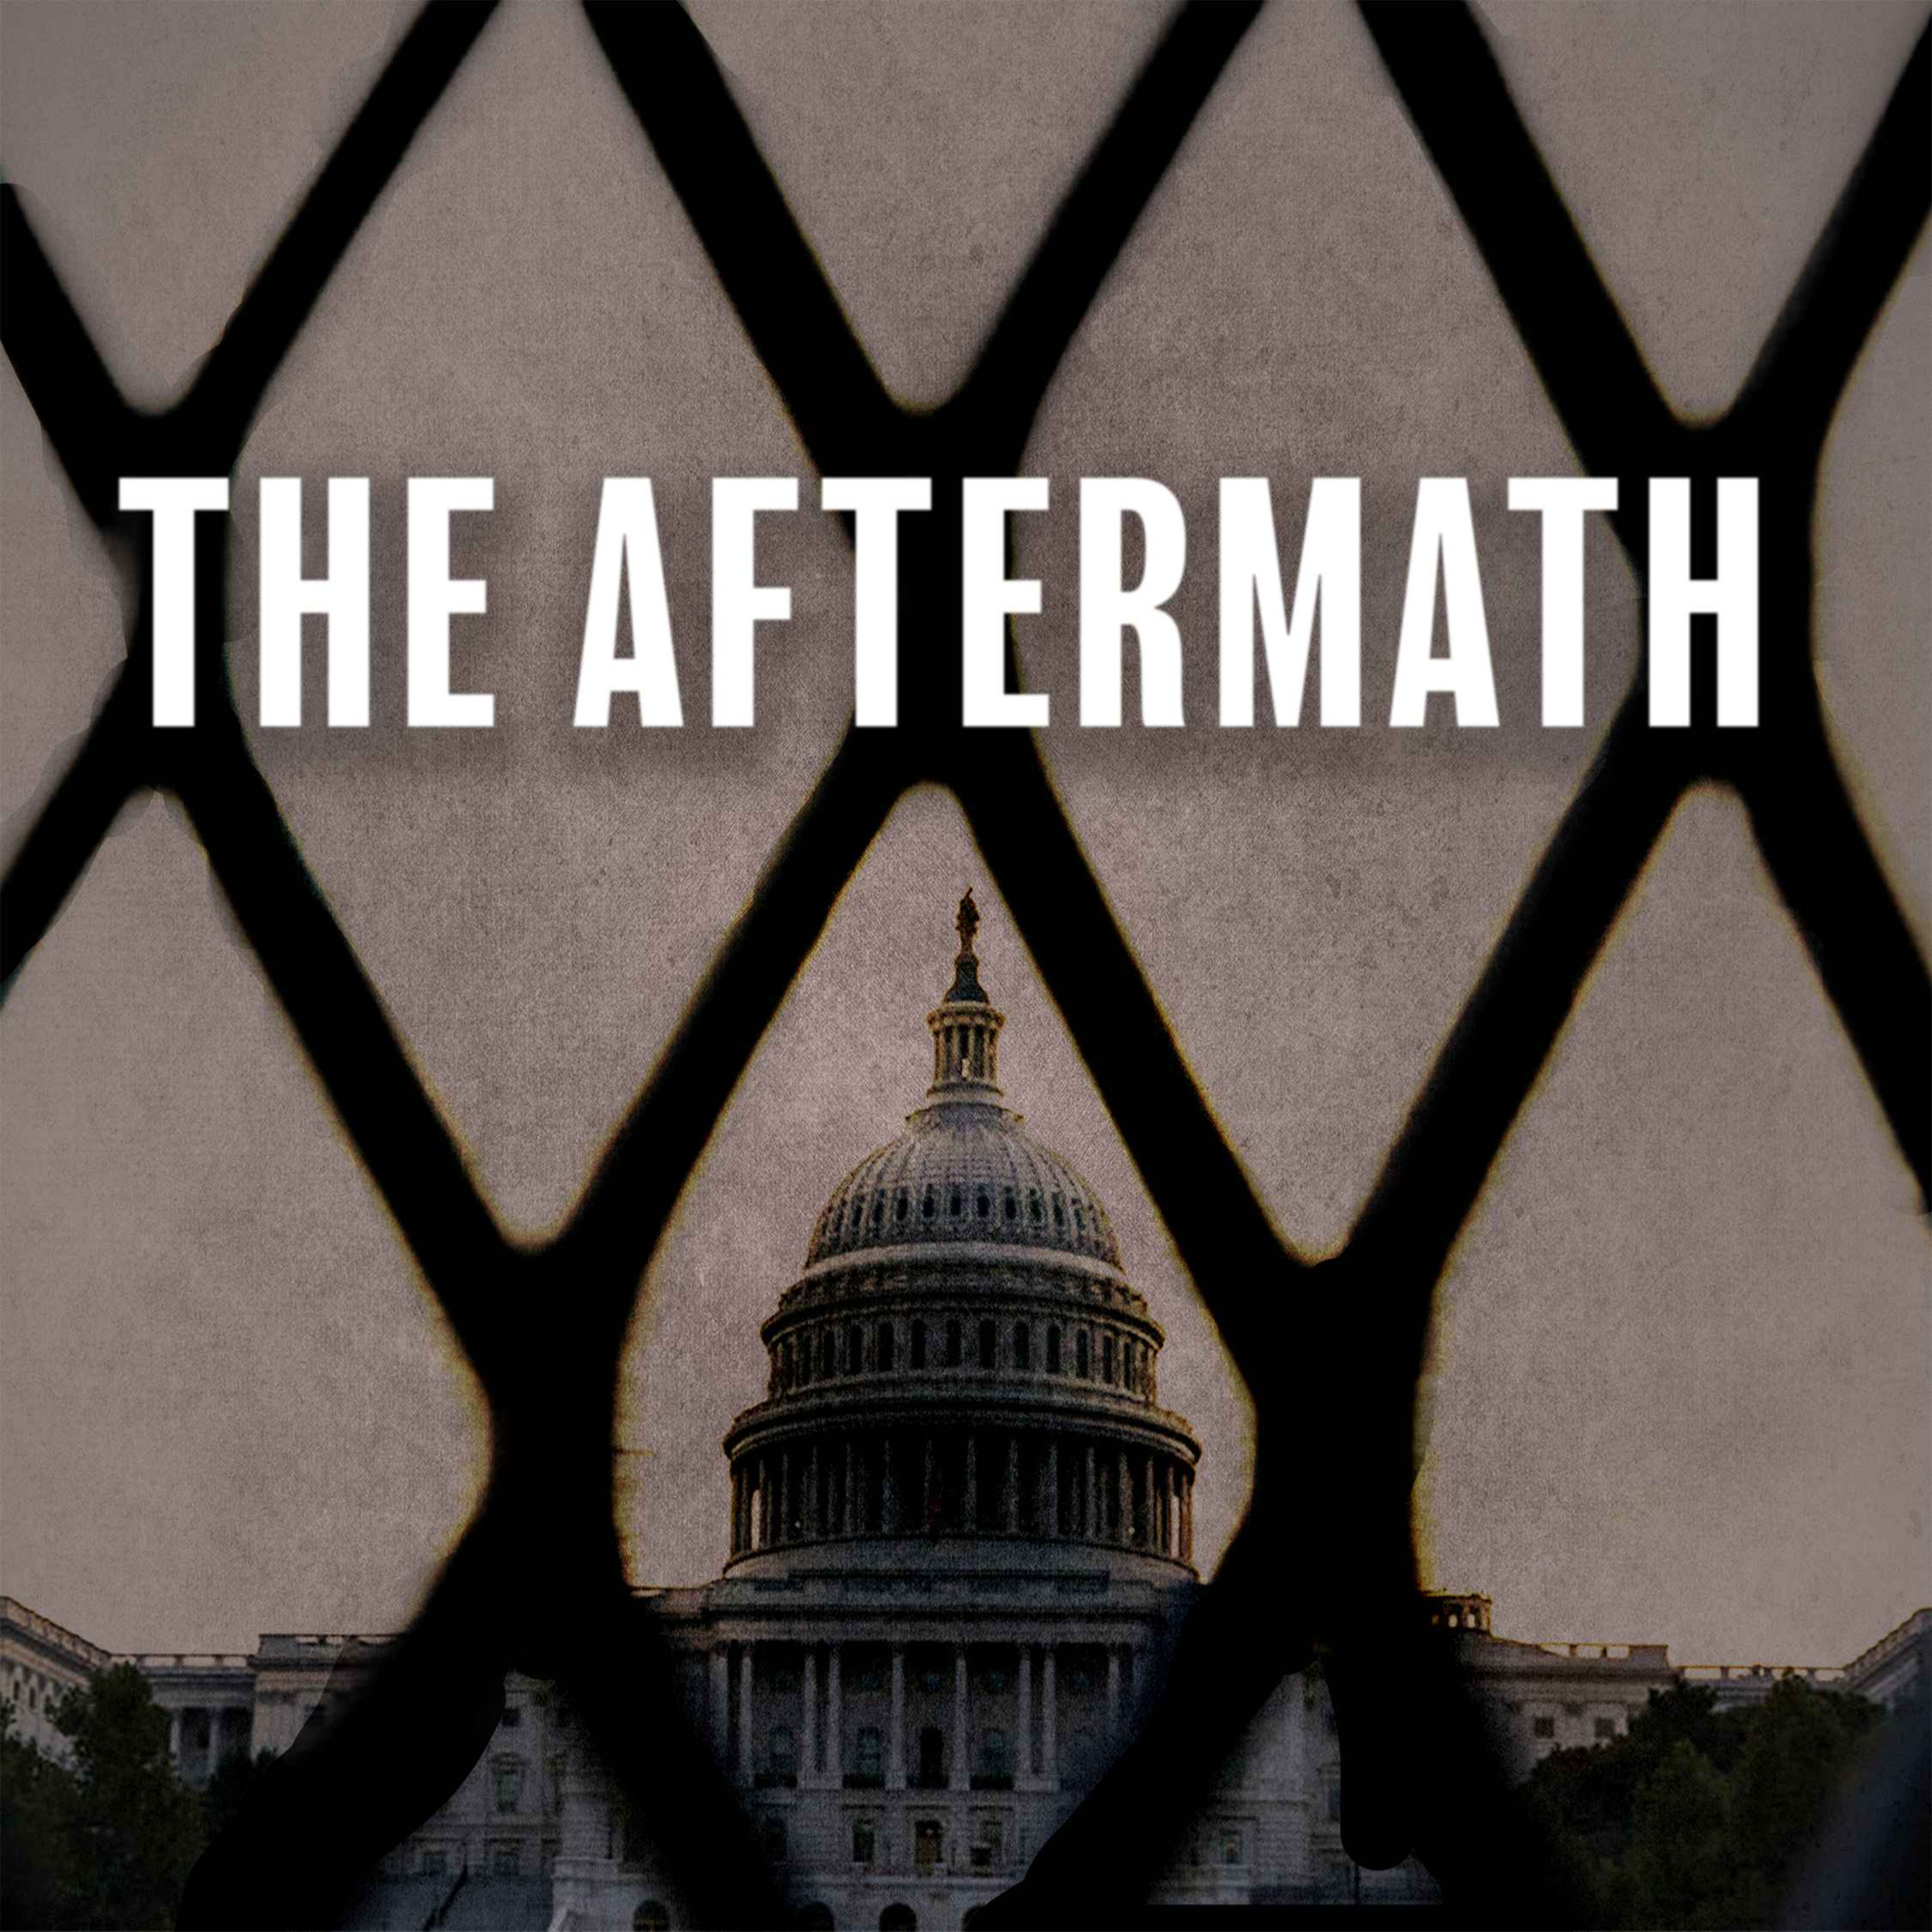 The Aftermath - Ep 2: Scattered to the Four Winds